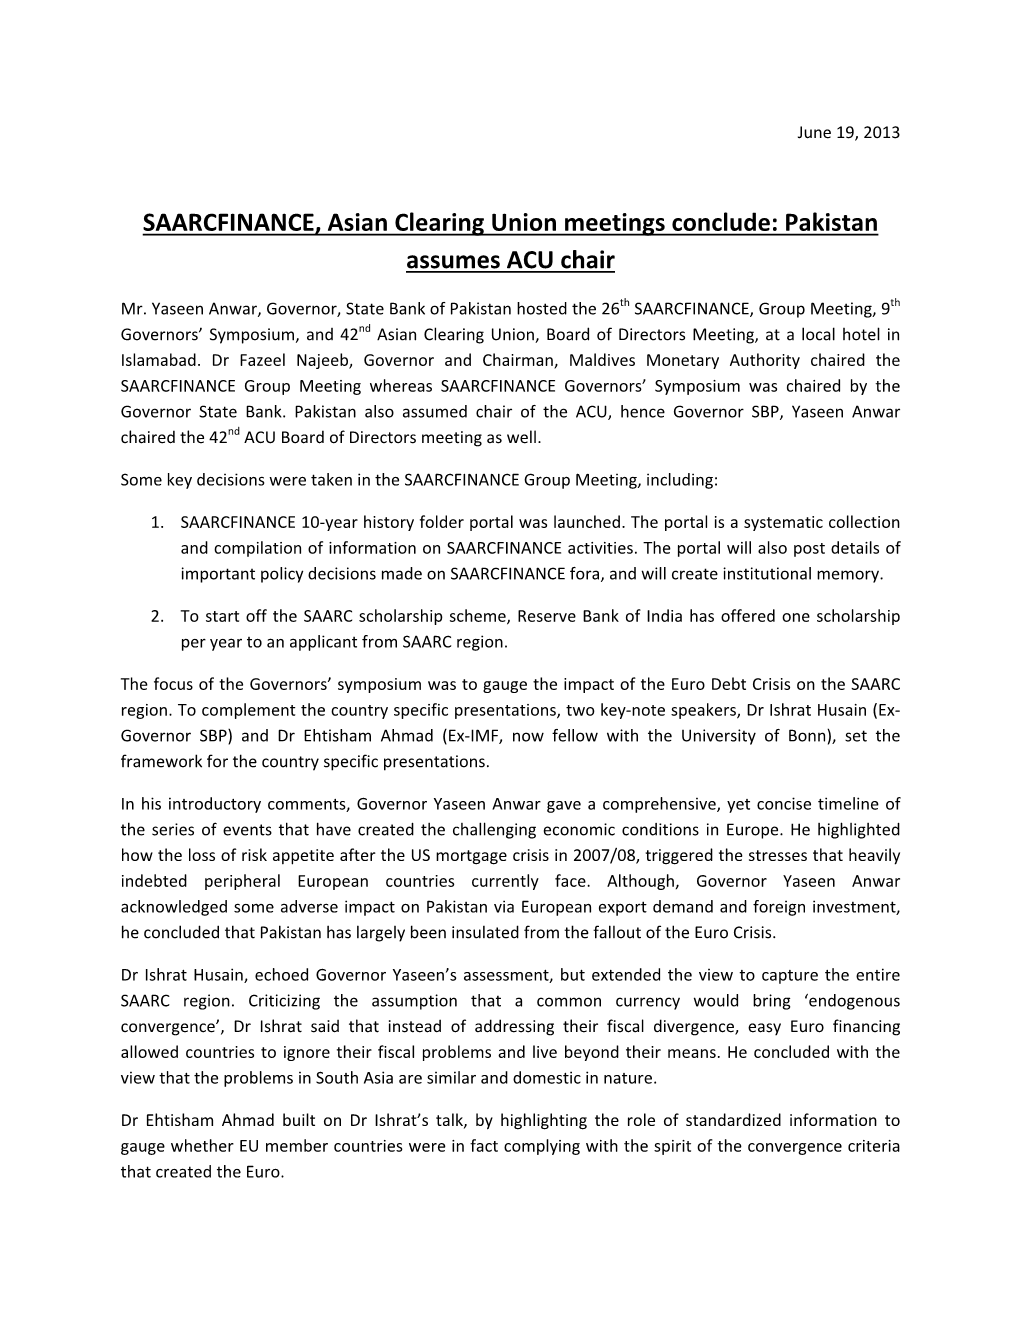 SAARCFINANCE, Asian Clearing Union Meetings Conclude: Pakistan Assumes ACU Chair